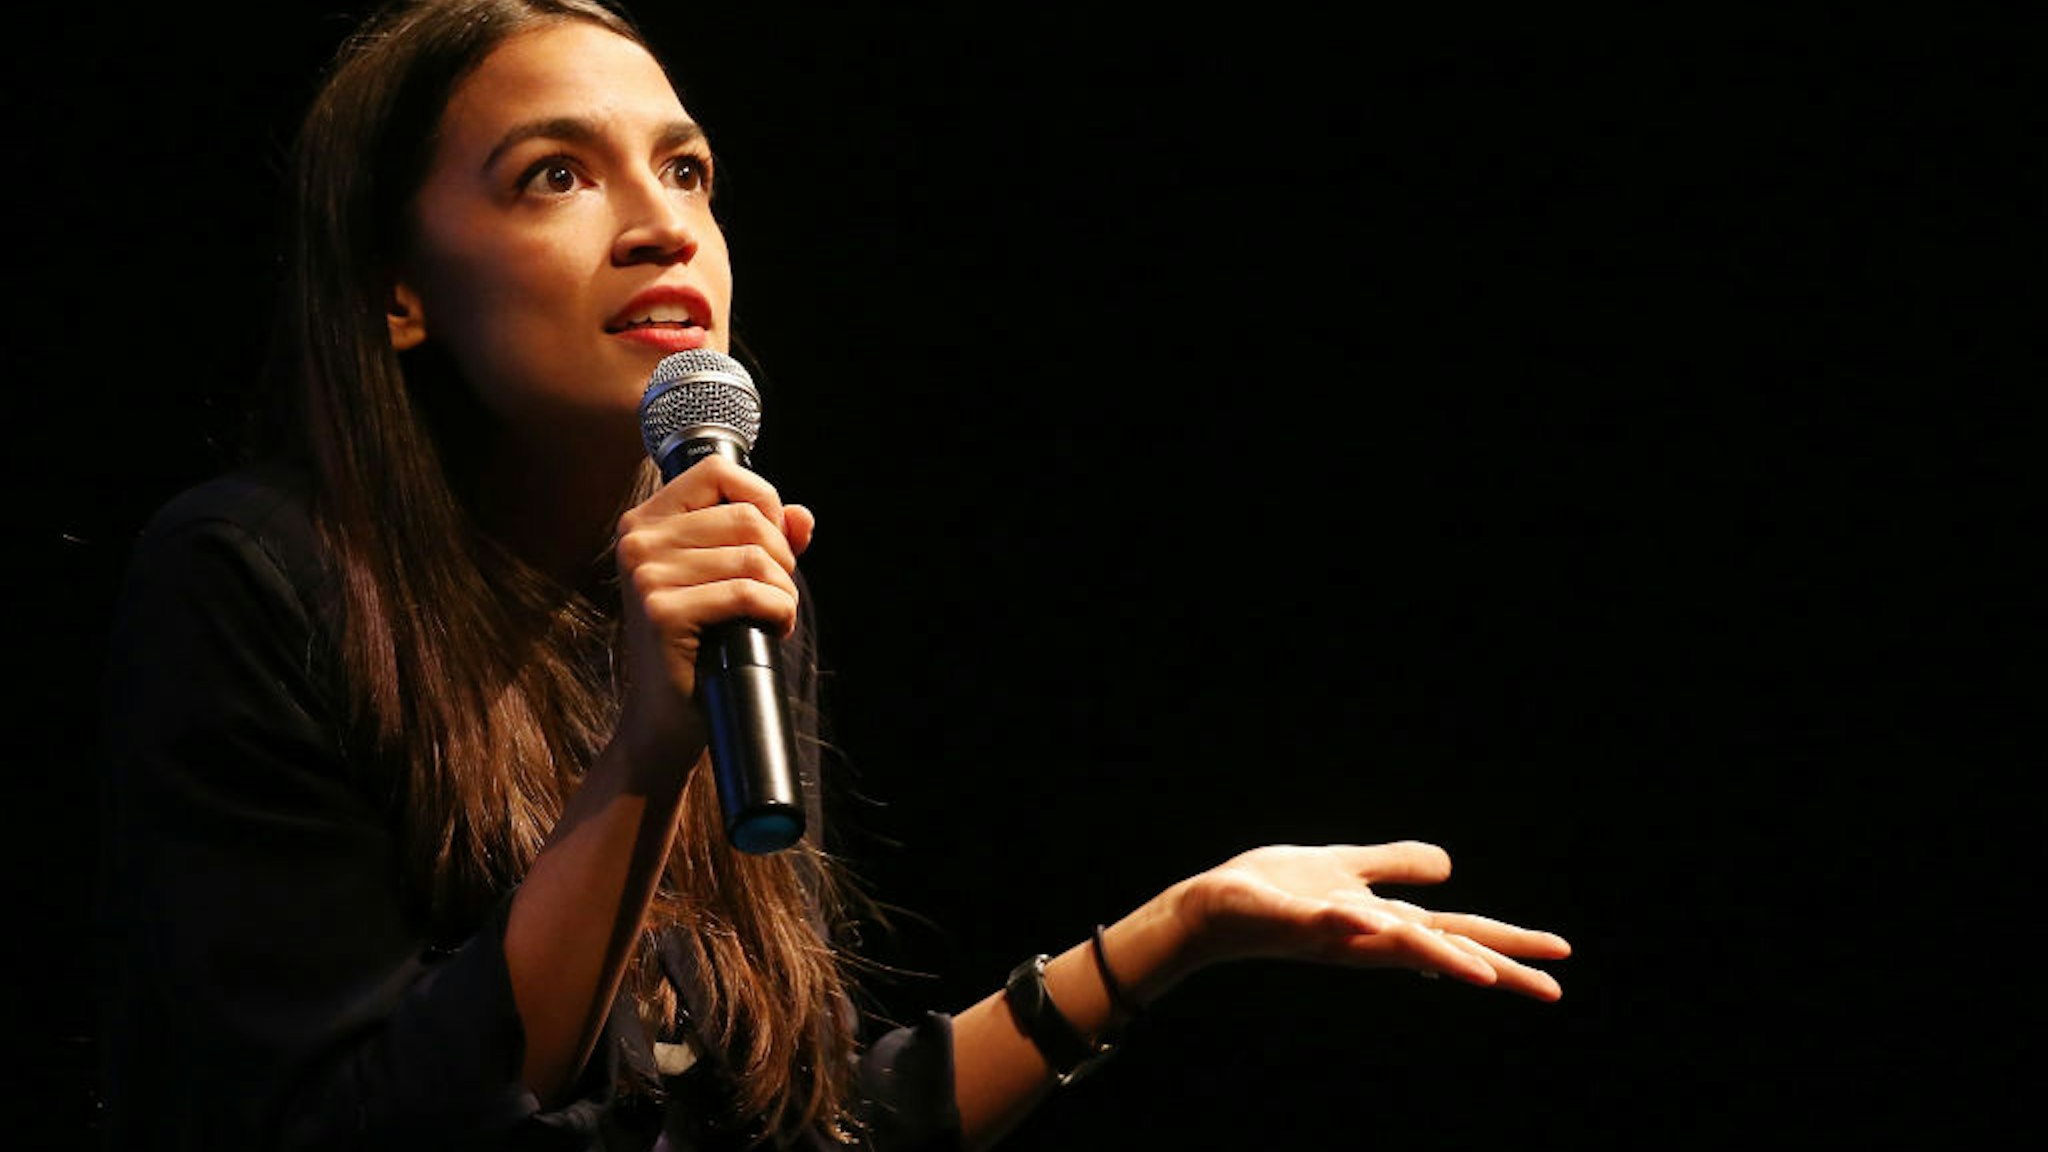 LOS ANGELES, CA - AUGUST 02: New York U.S. House candidate Alexandria Ocasio-Cortez speaks at a progressive fundraiser on August 2, 2018 in Los Angeles, California. The rising political star is on her third trip away from New York in three weeks and is projected to become the youngest woman elected to Congress this November when she will be 29 years old.